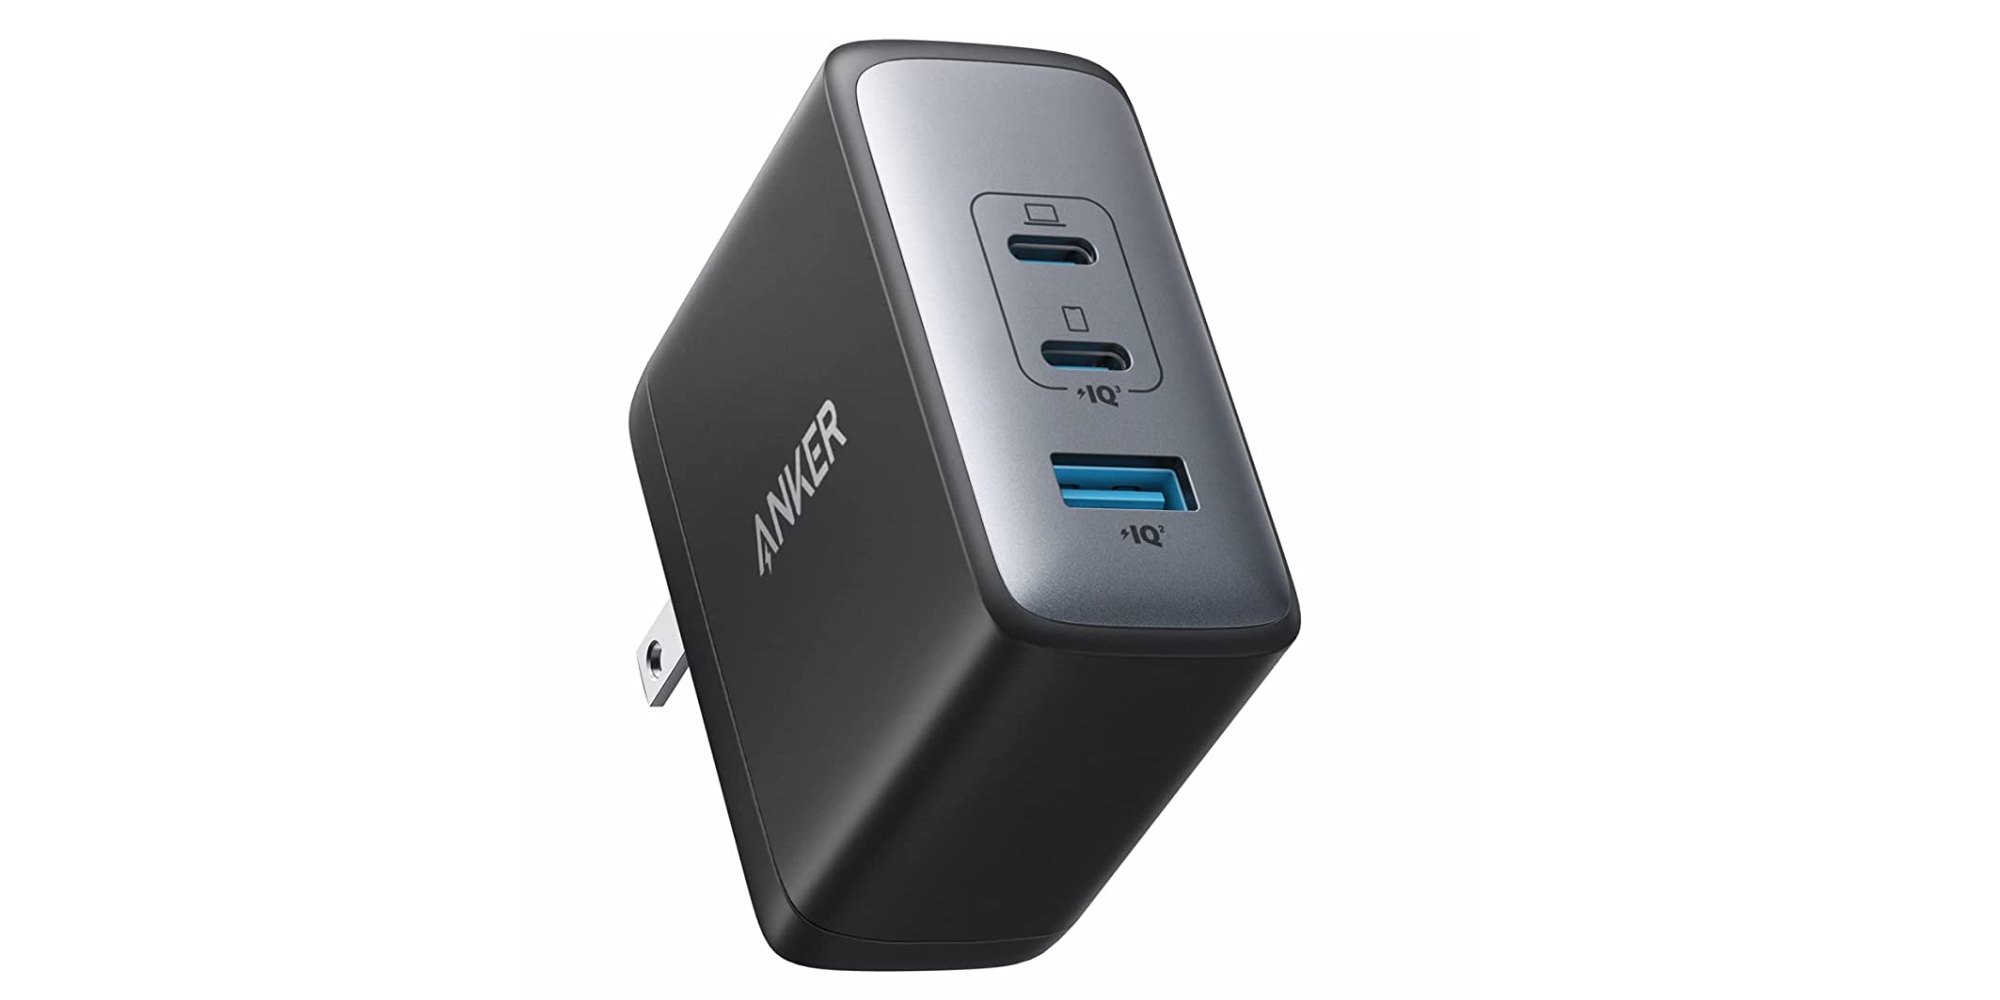 UGREEN 100W PD Charger With 3 USB-C Ports Currently $16 Off